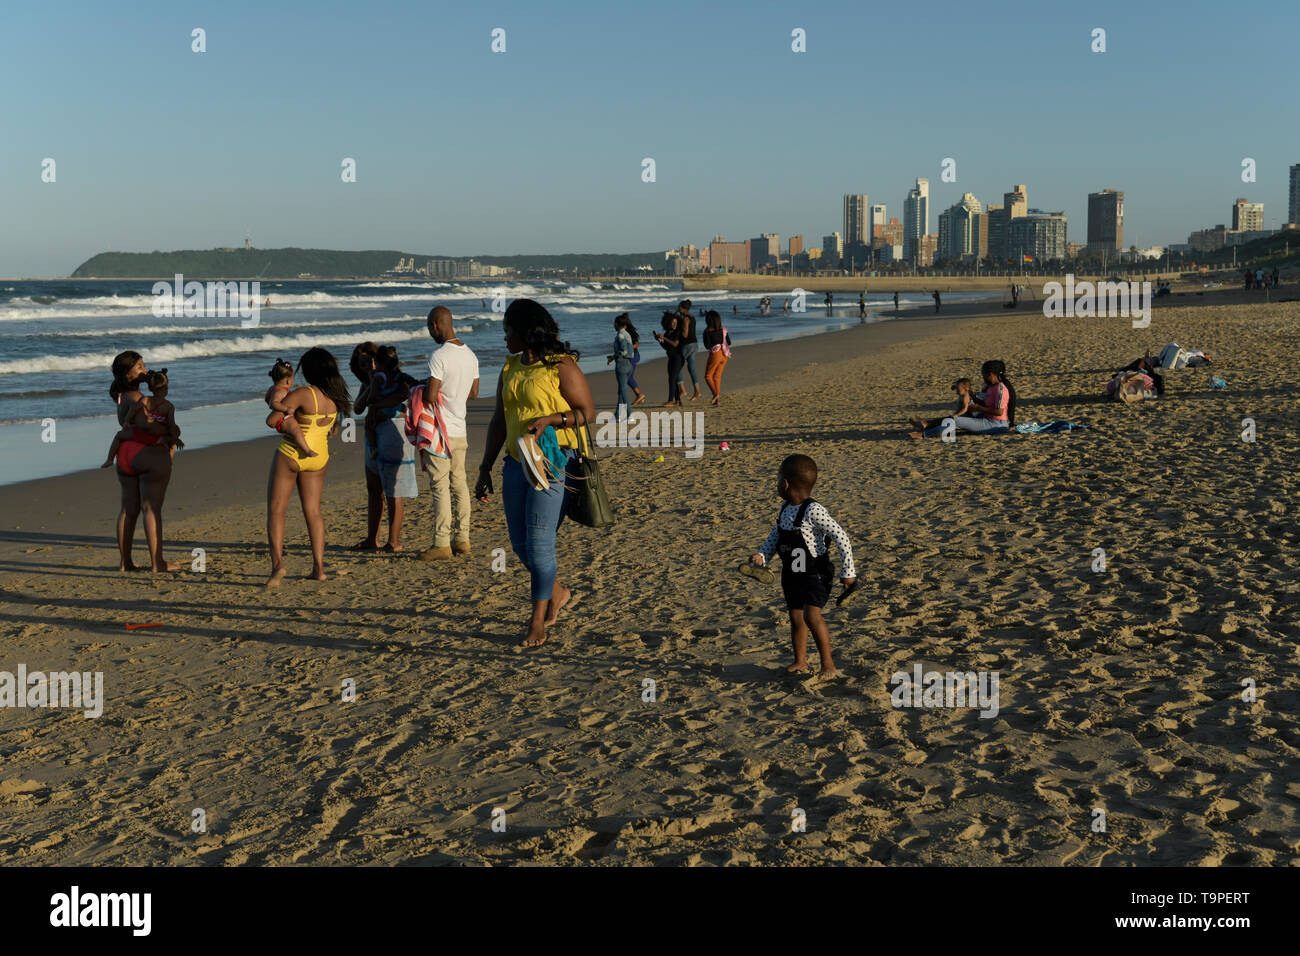 Family groups walking and standing on beach, Durban, KwaZulu-Natal, South Africa, ethnic, landscape, people, friends, city, buildings Stock Photo